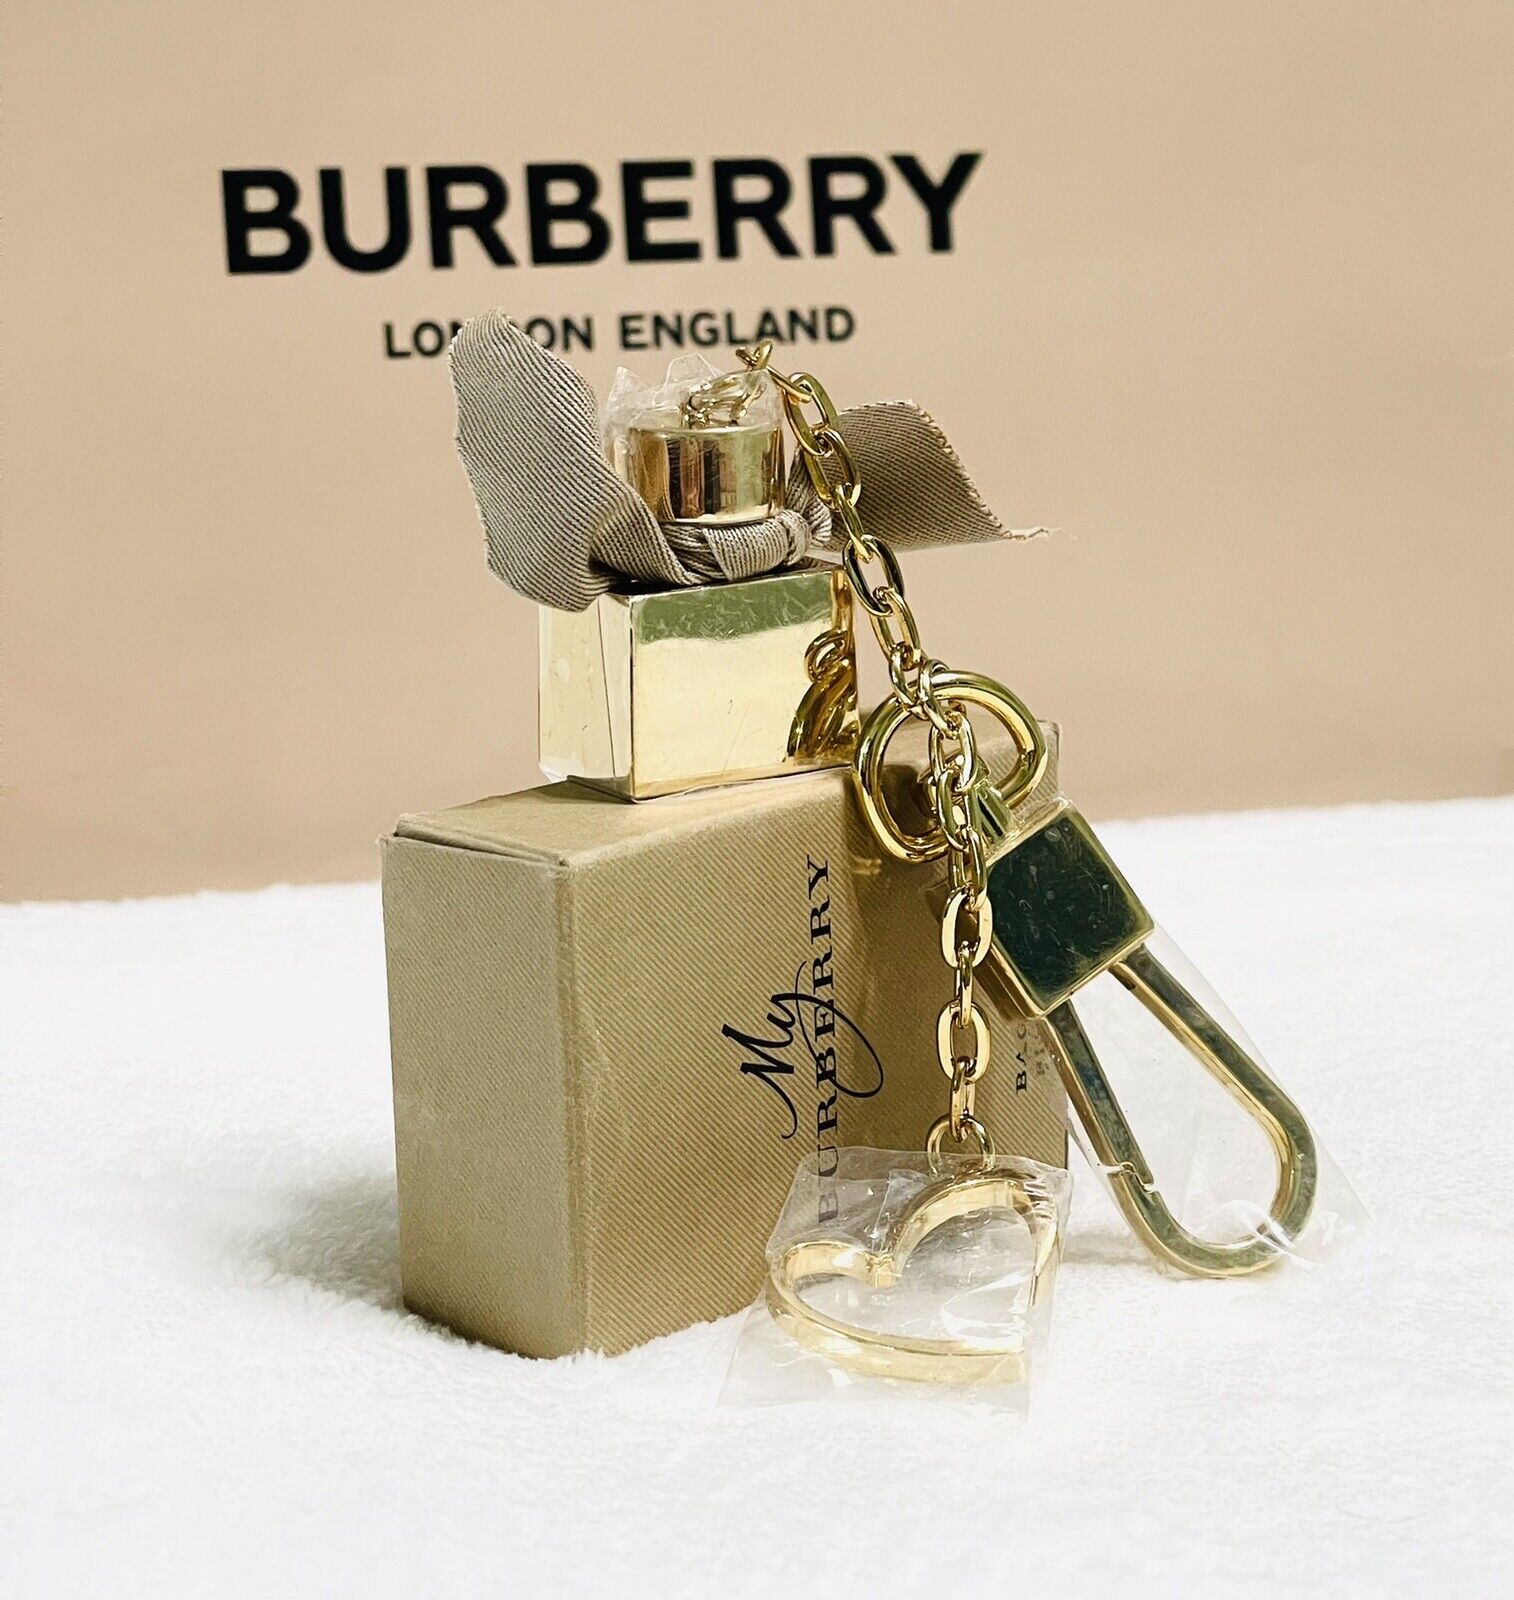 My BURBERRY Keychain / Bag charm. It's brand new in the box.